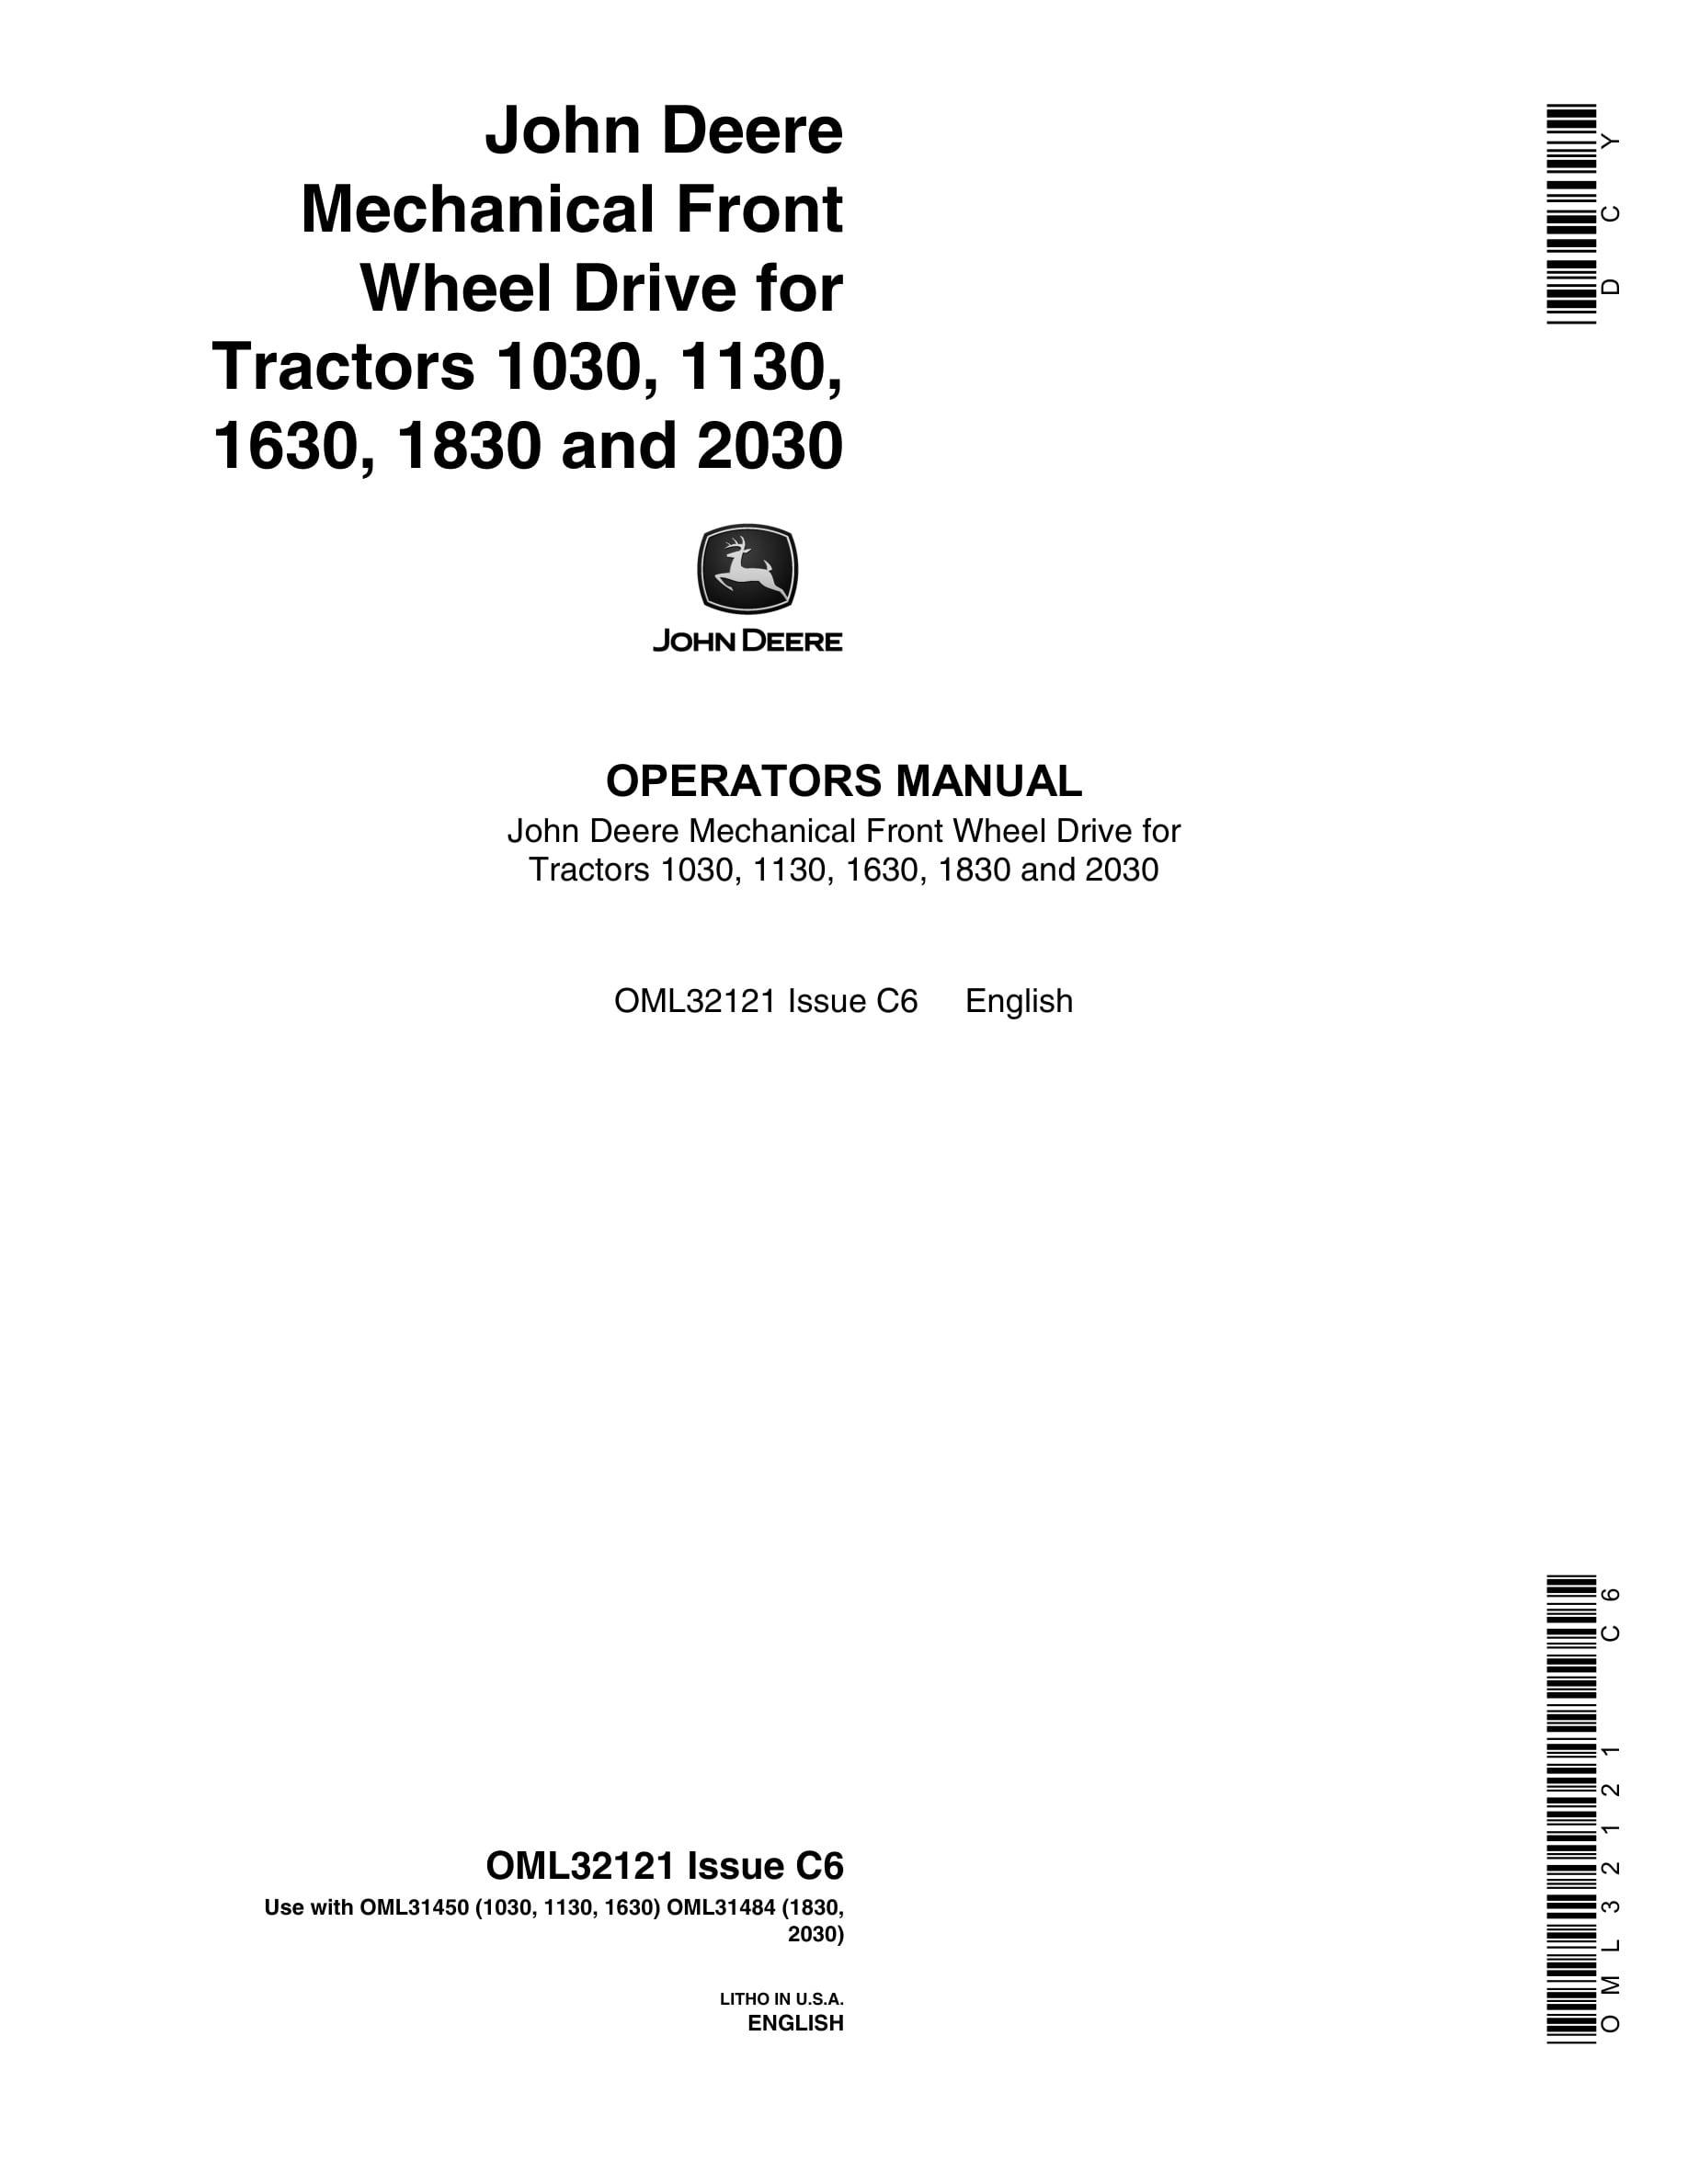 John Deere 1030, 1130, 1630, 1830 And 2030 Mechanical Front Wheel Drive For Tractors Operator Manuals OML32121-1